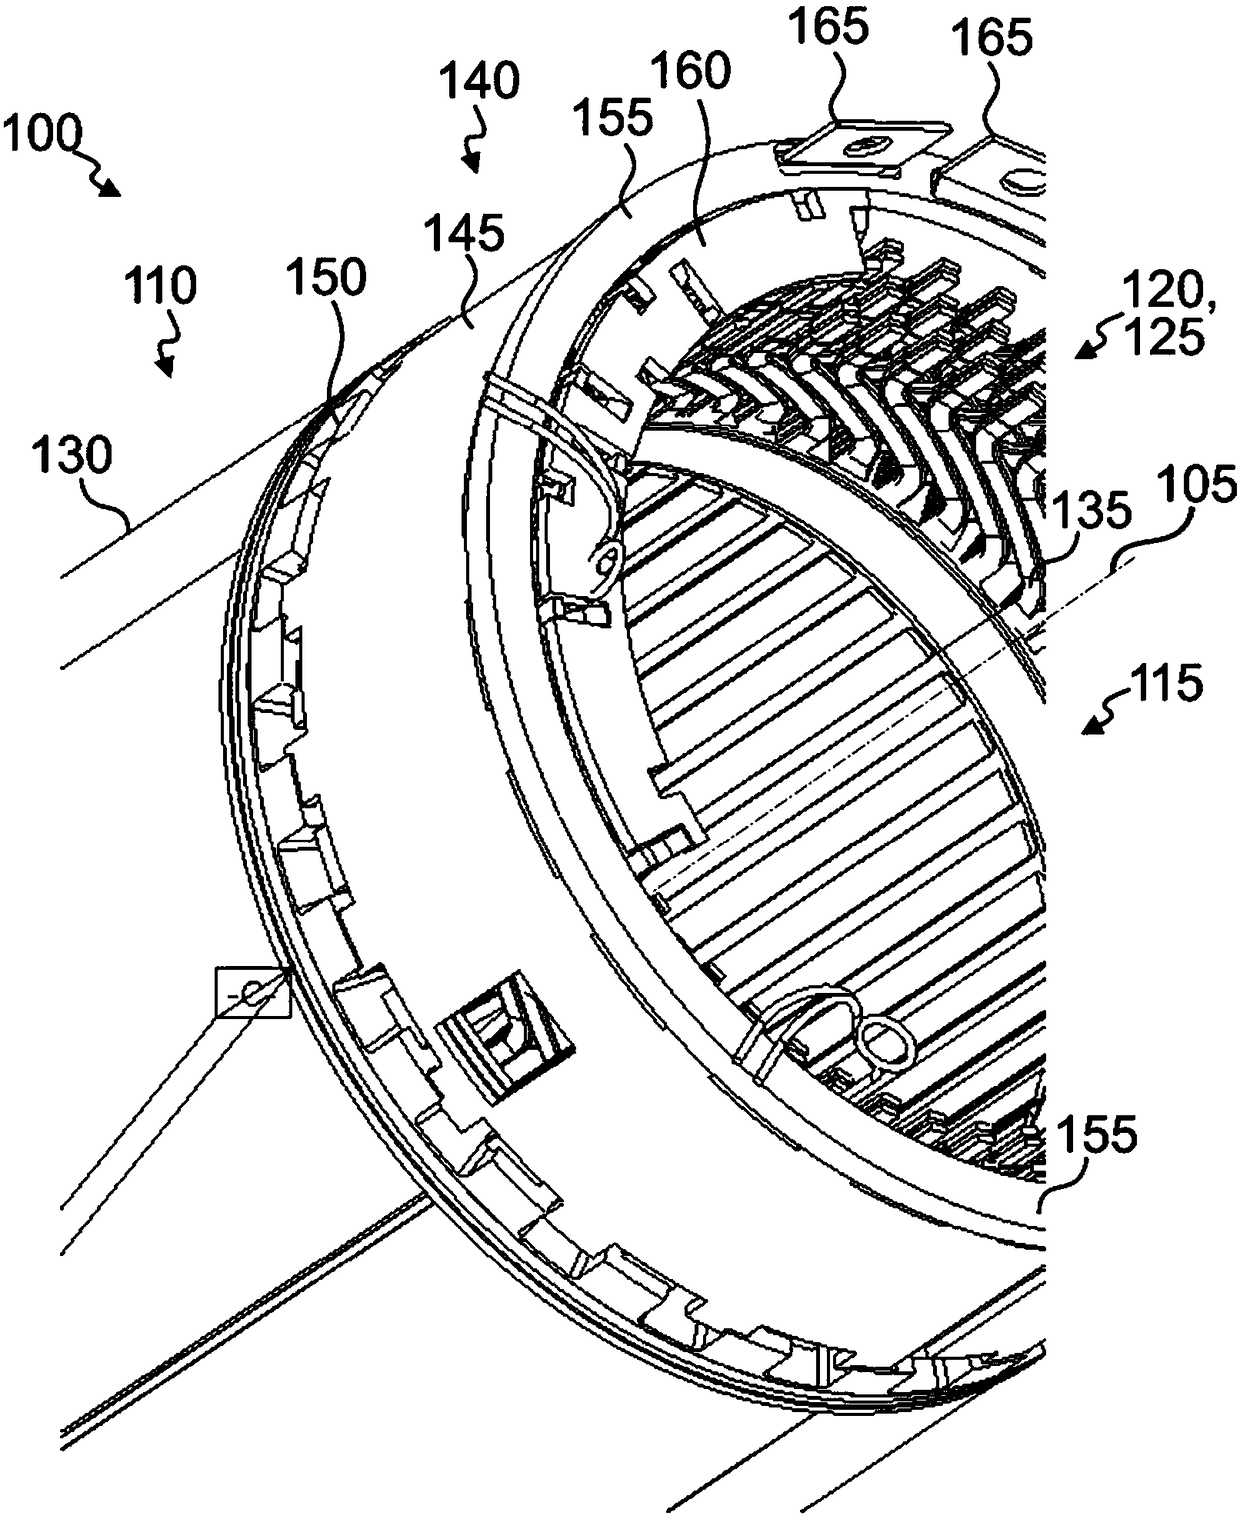 Interconnecting assembly for motor